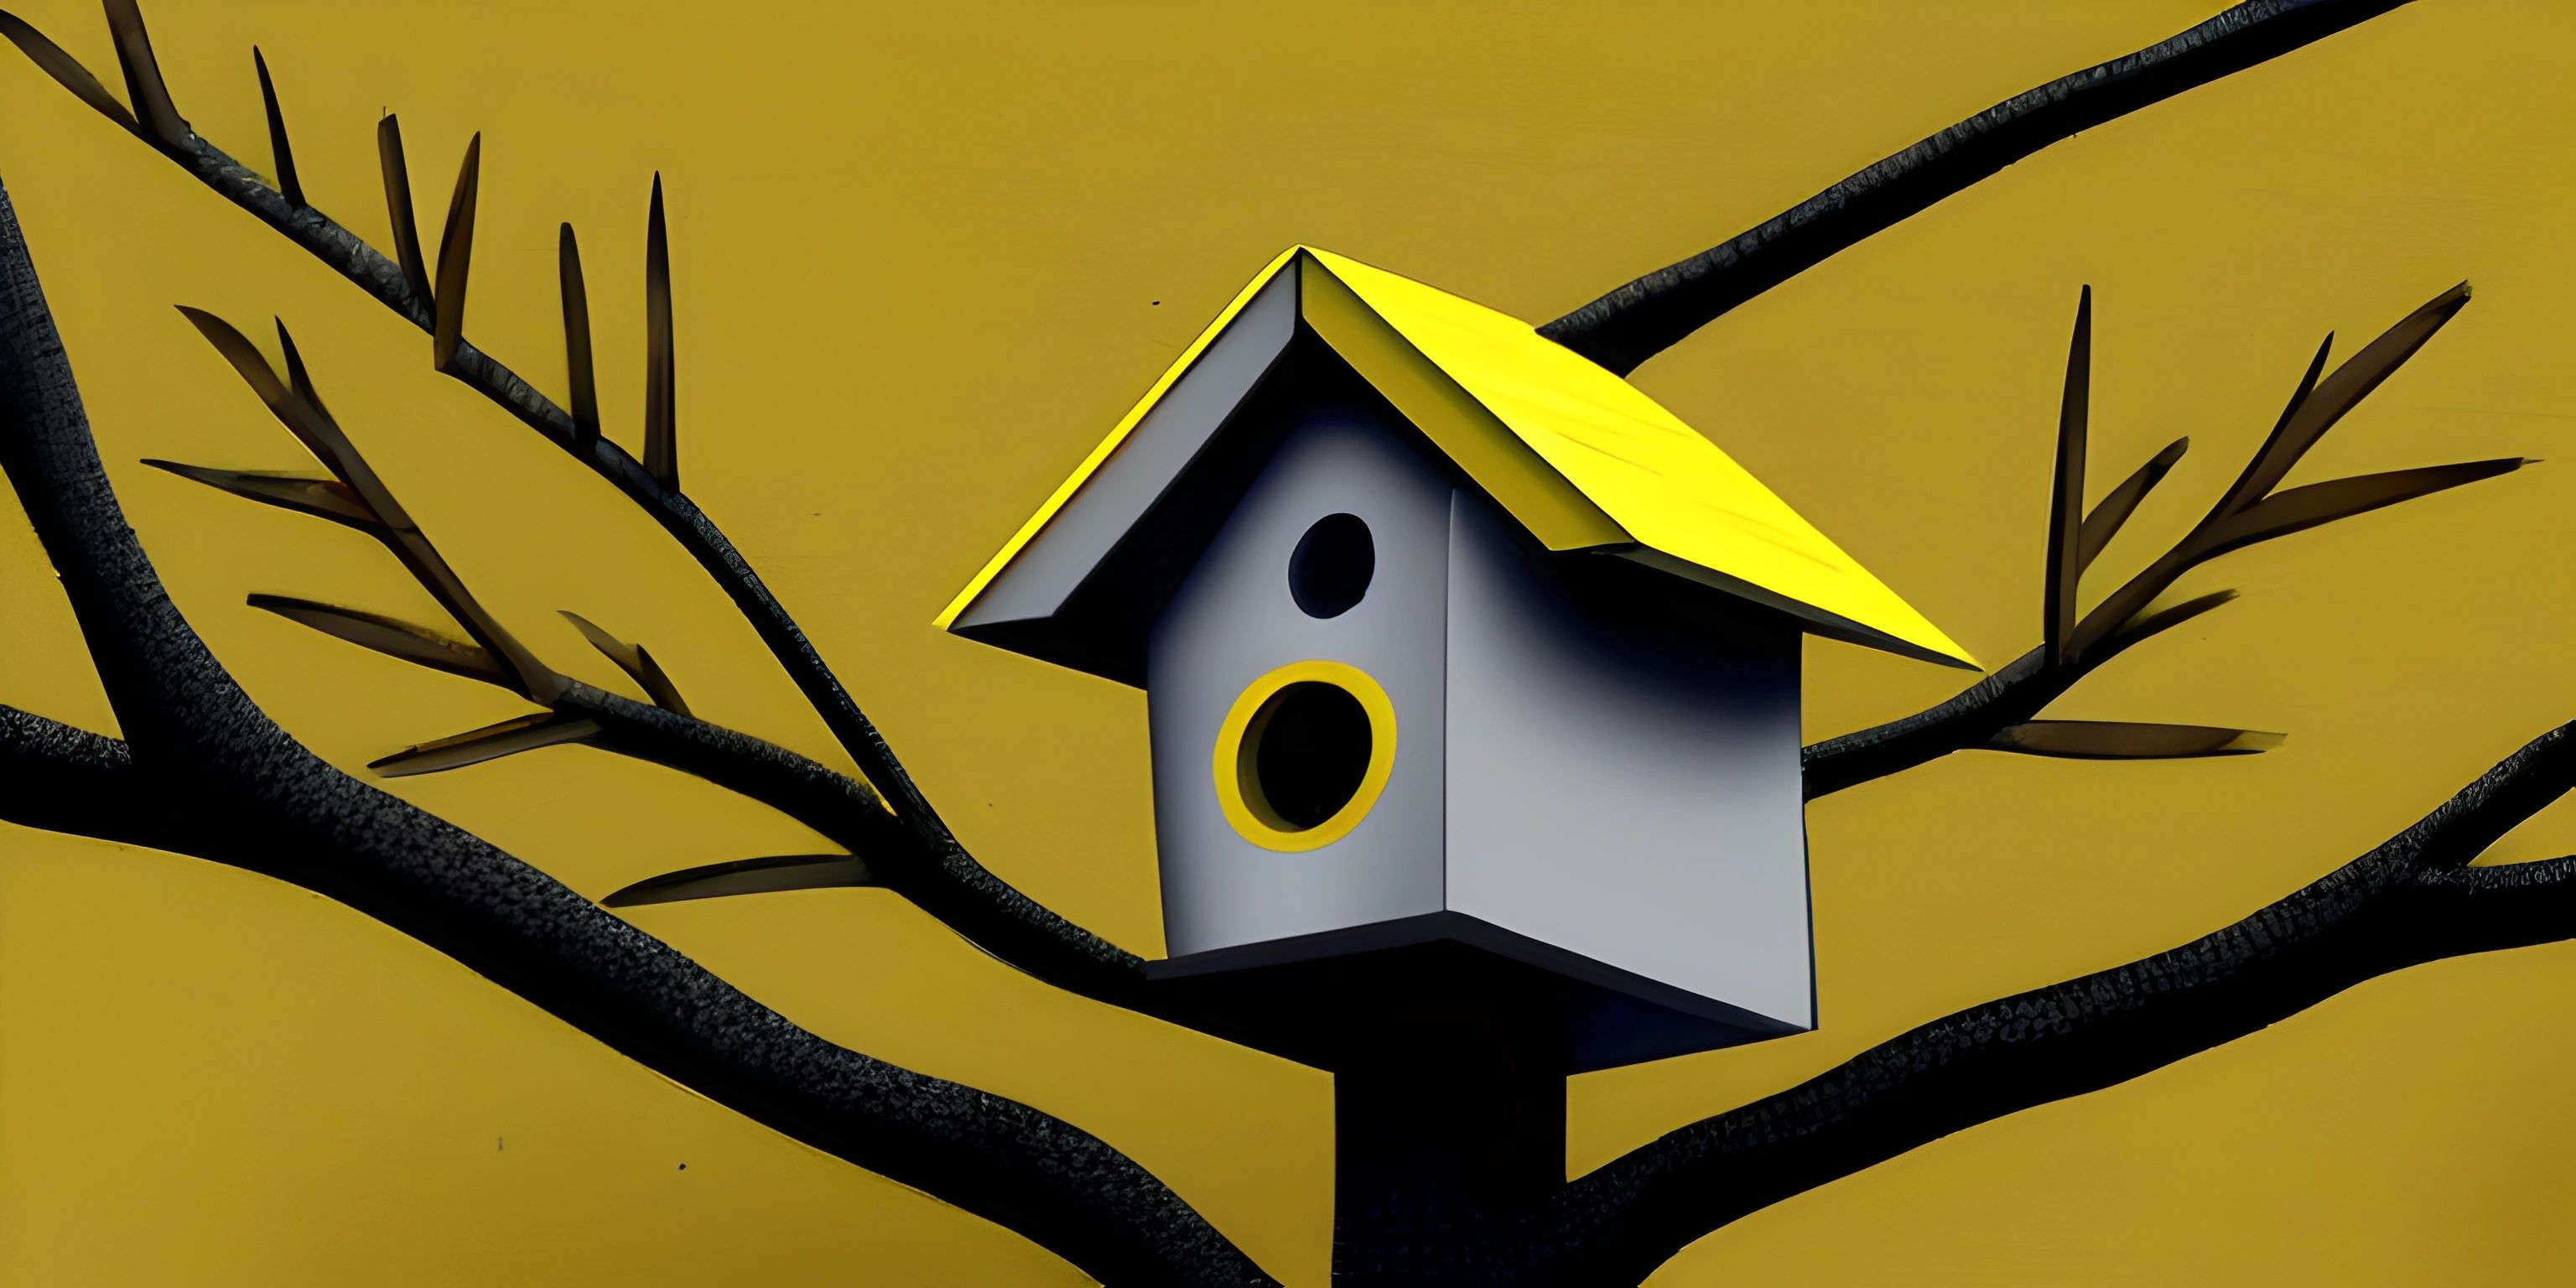 a birdhouse attached to the side of a tree branch near yellow background or wall